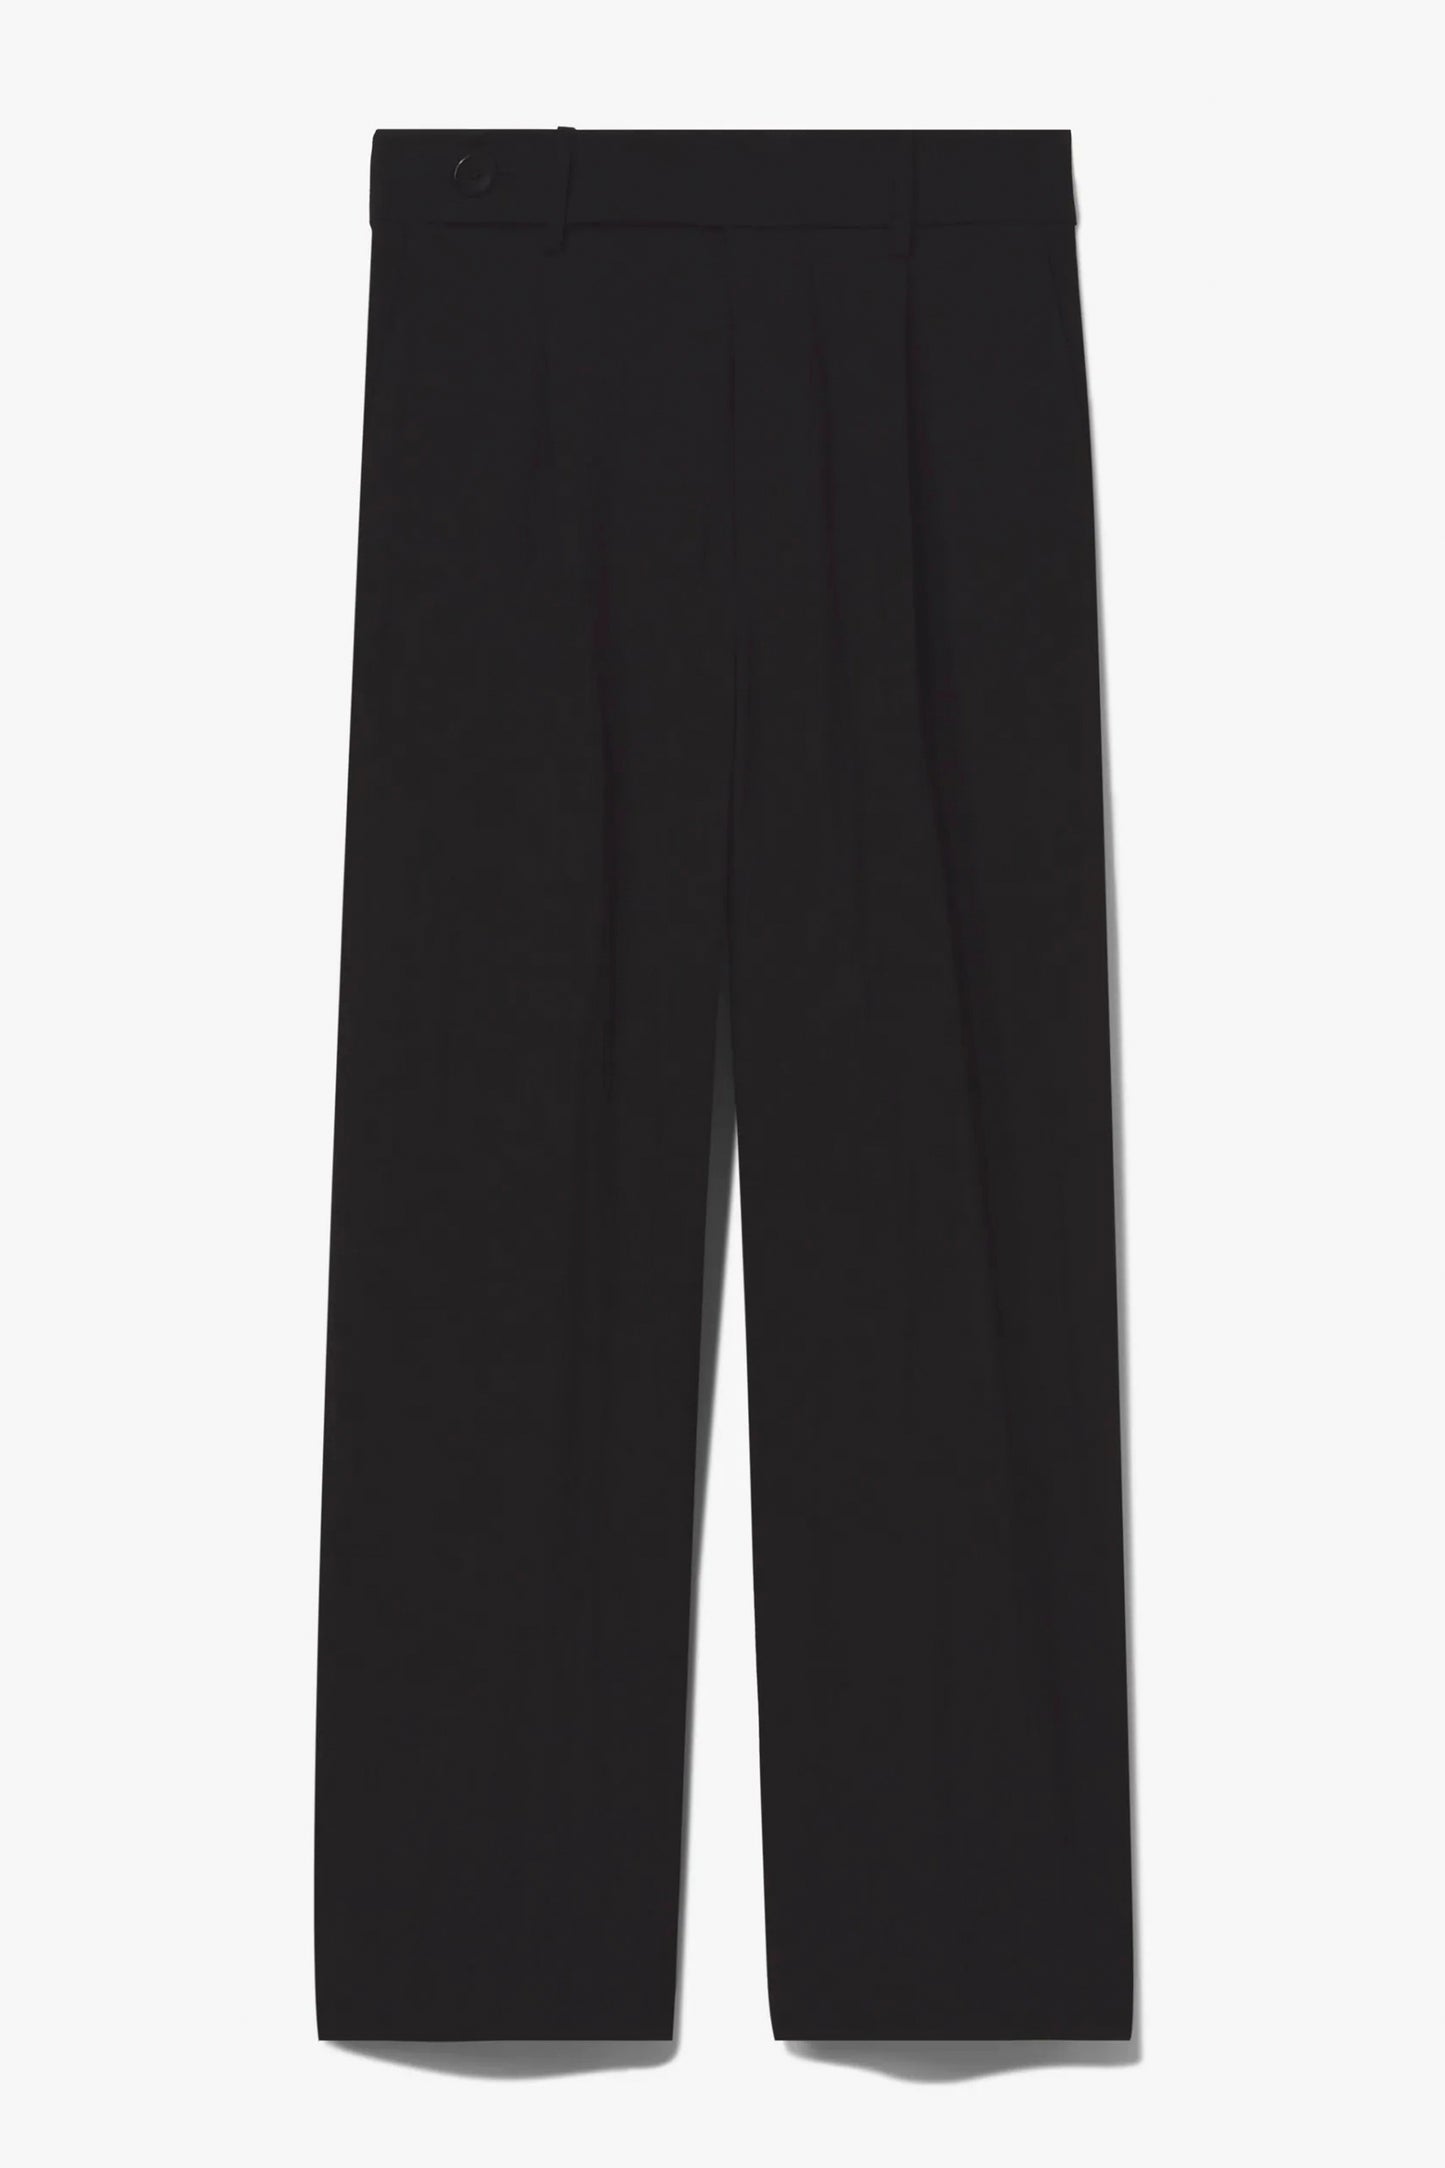 Drapey Suiting Wide Leg Pant